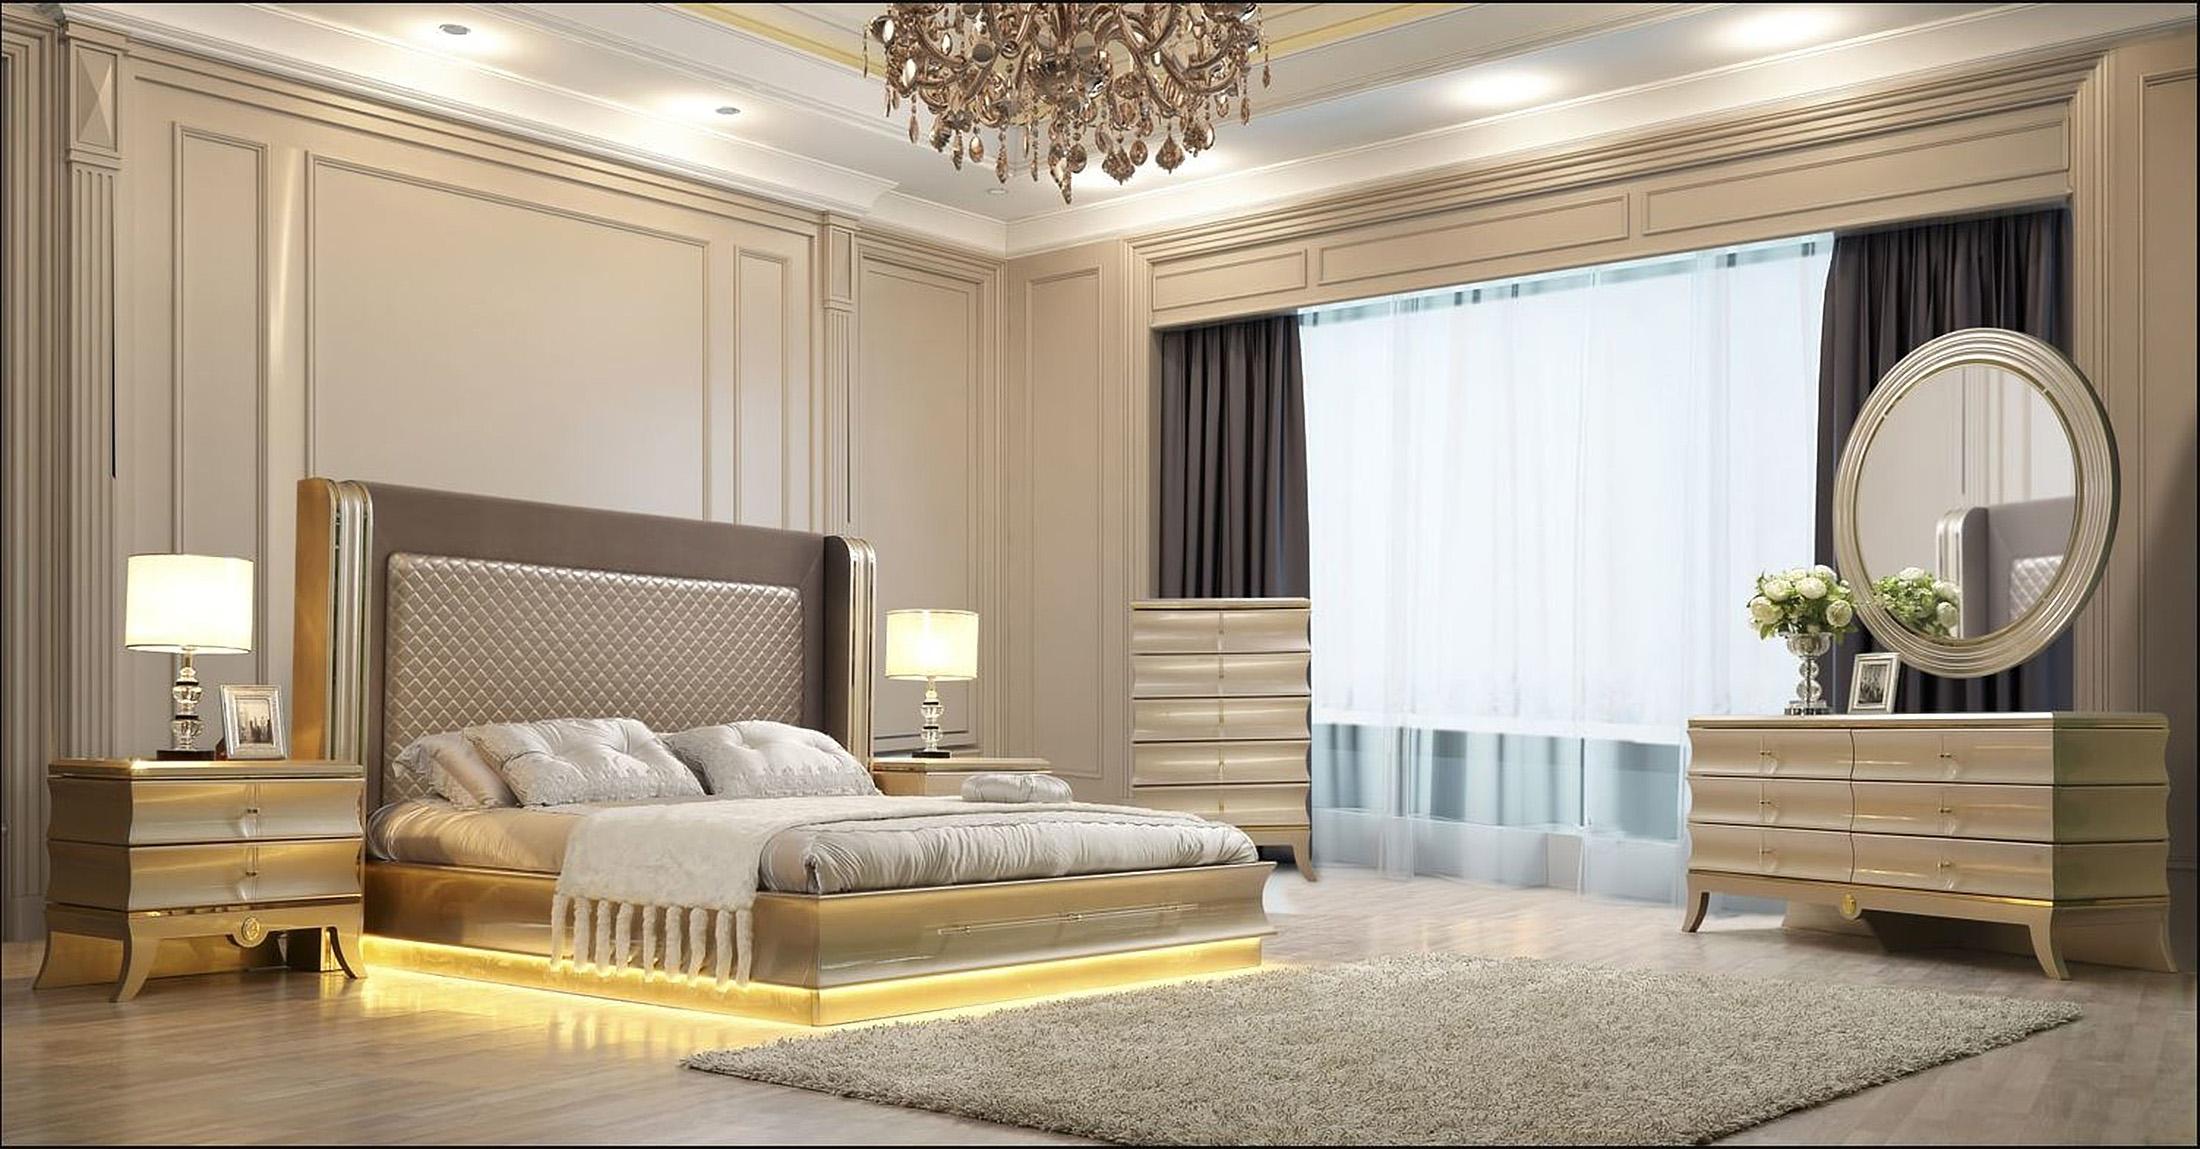 

    
Glam Belle Silver & Gold CAL King Bedroom Set 6Pcs Contemporary Homey Design HD-925
